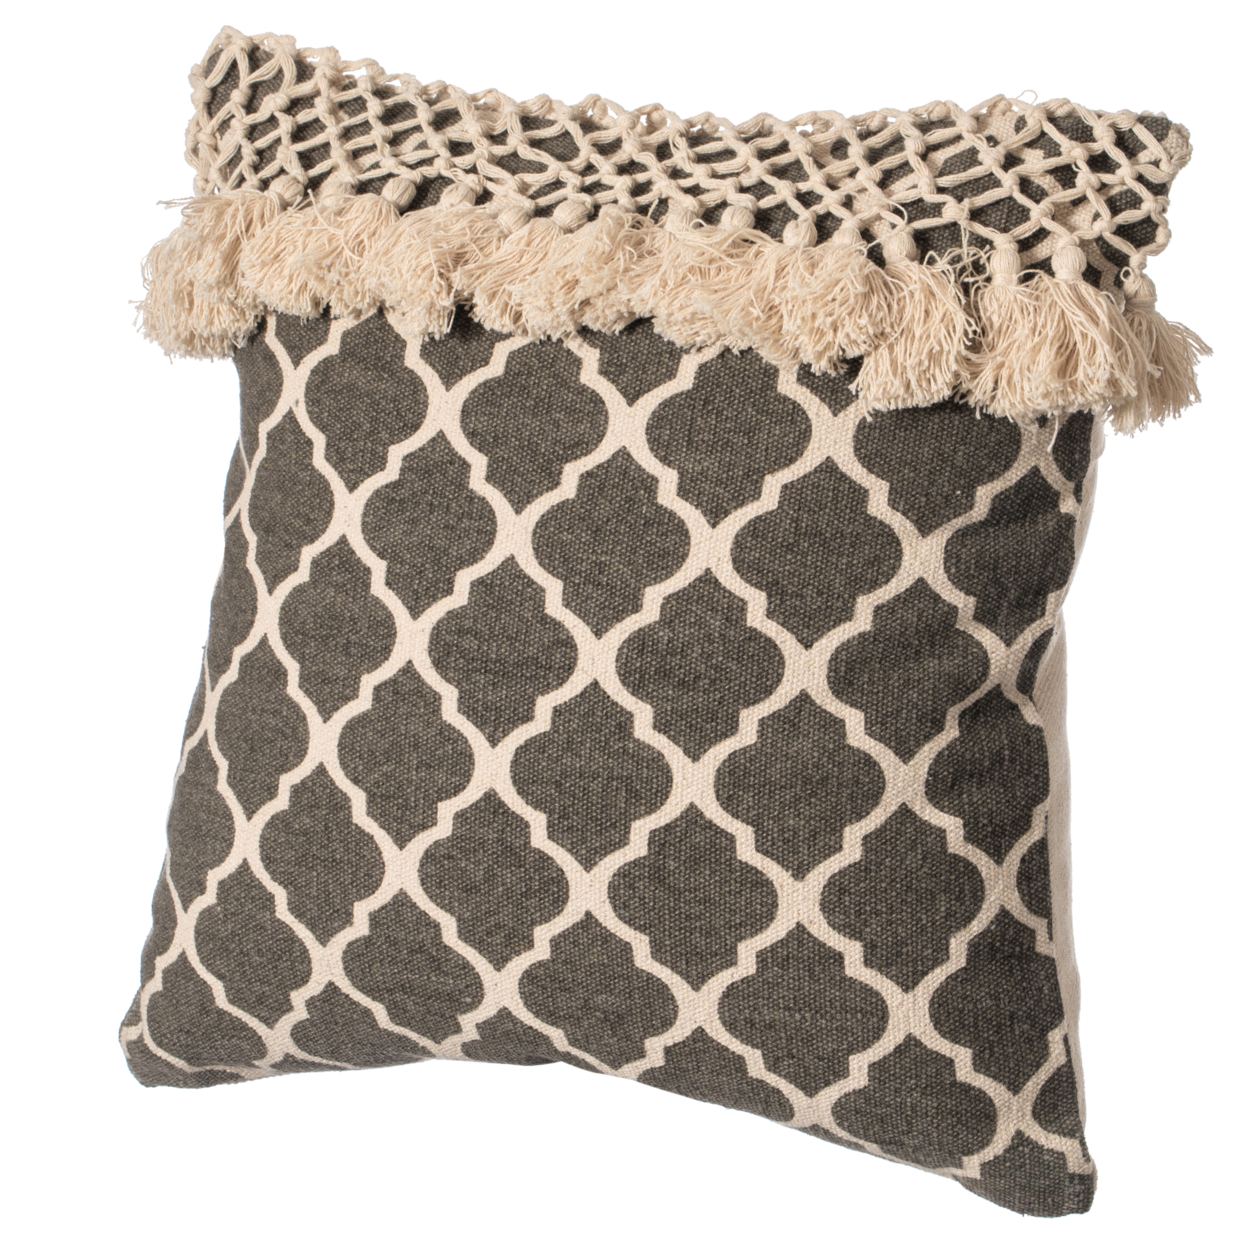 16" Handwoven Cotton Throw Pillow Cover with Ogee Pattern and Tasseled Top - charcoal with cushion